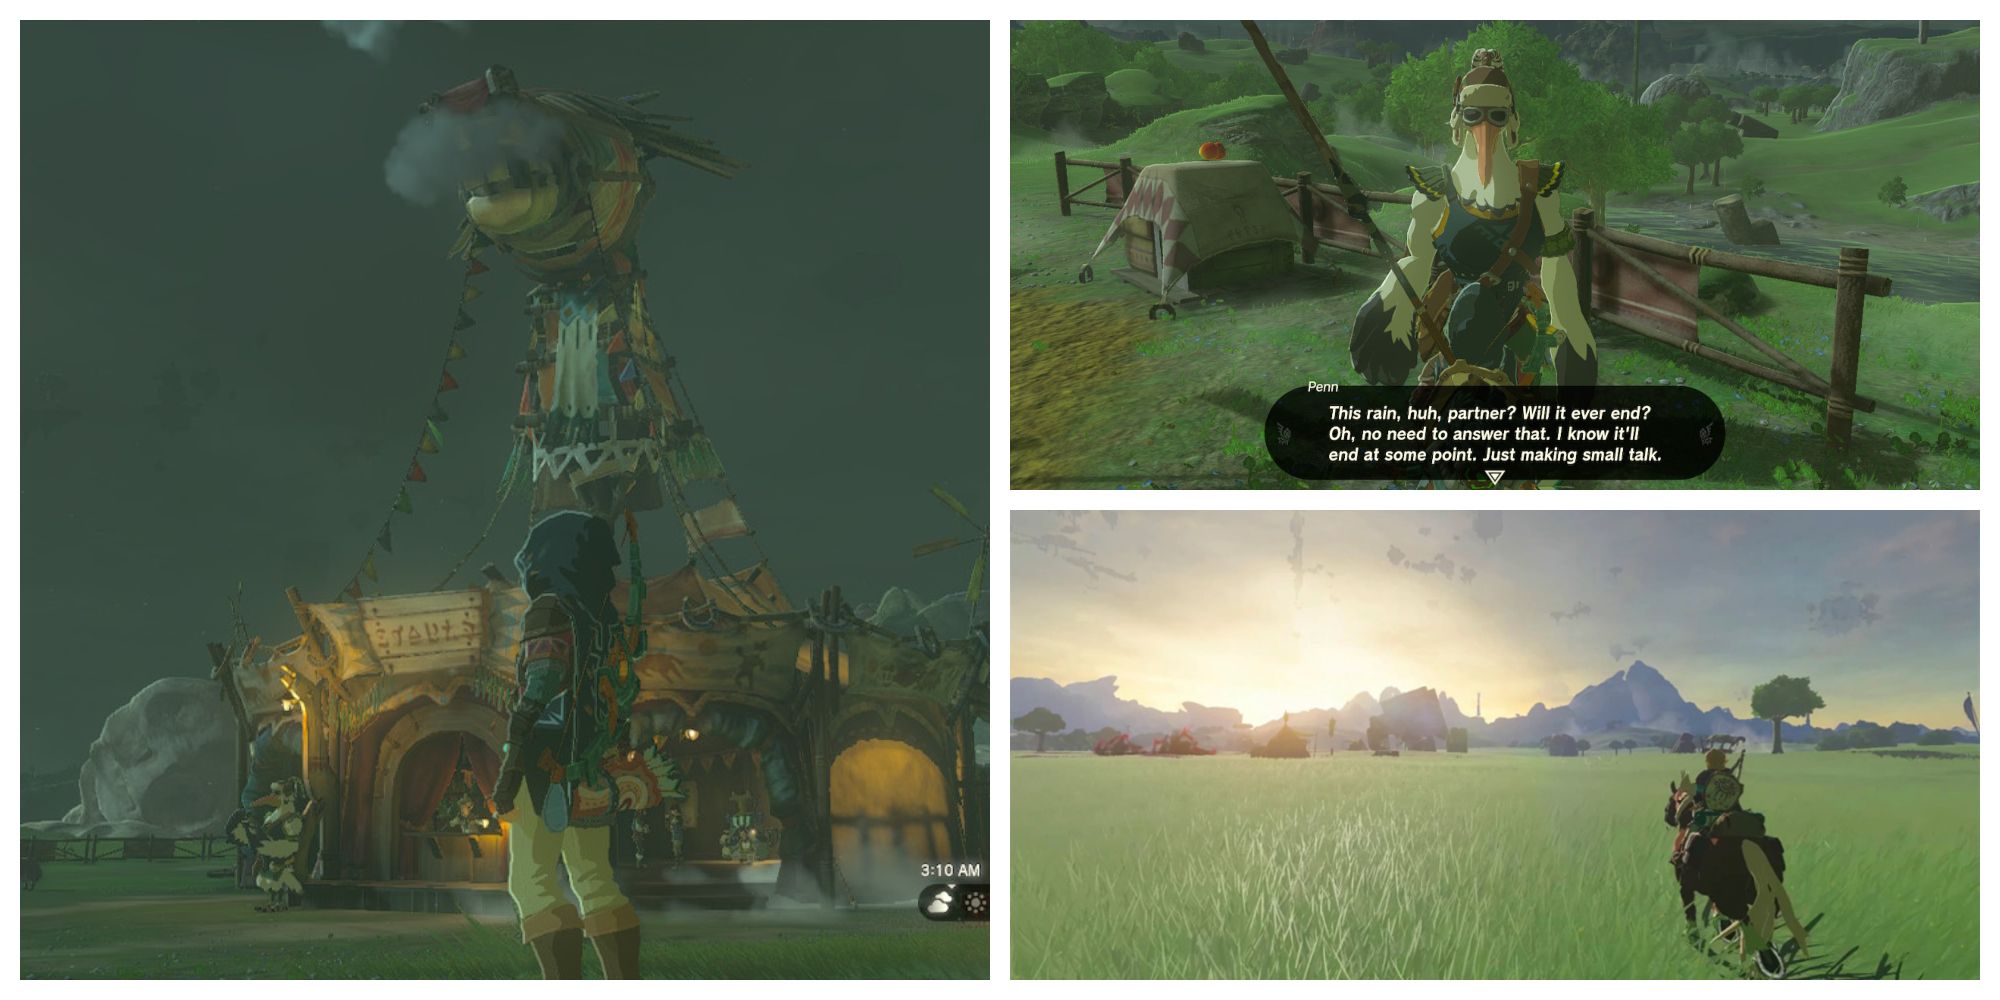 TotK - Link Outside Stable, Link Riding Horse, & Link Speaking with Penn